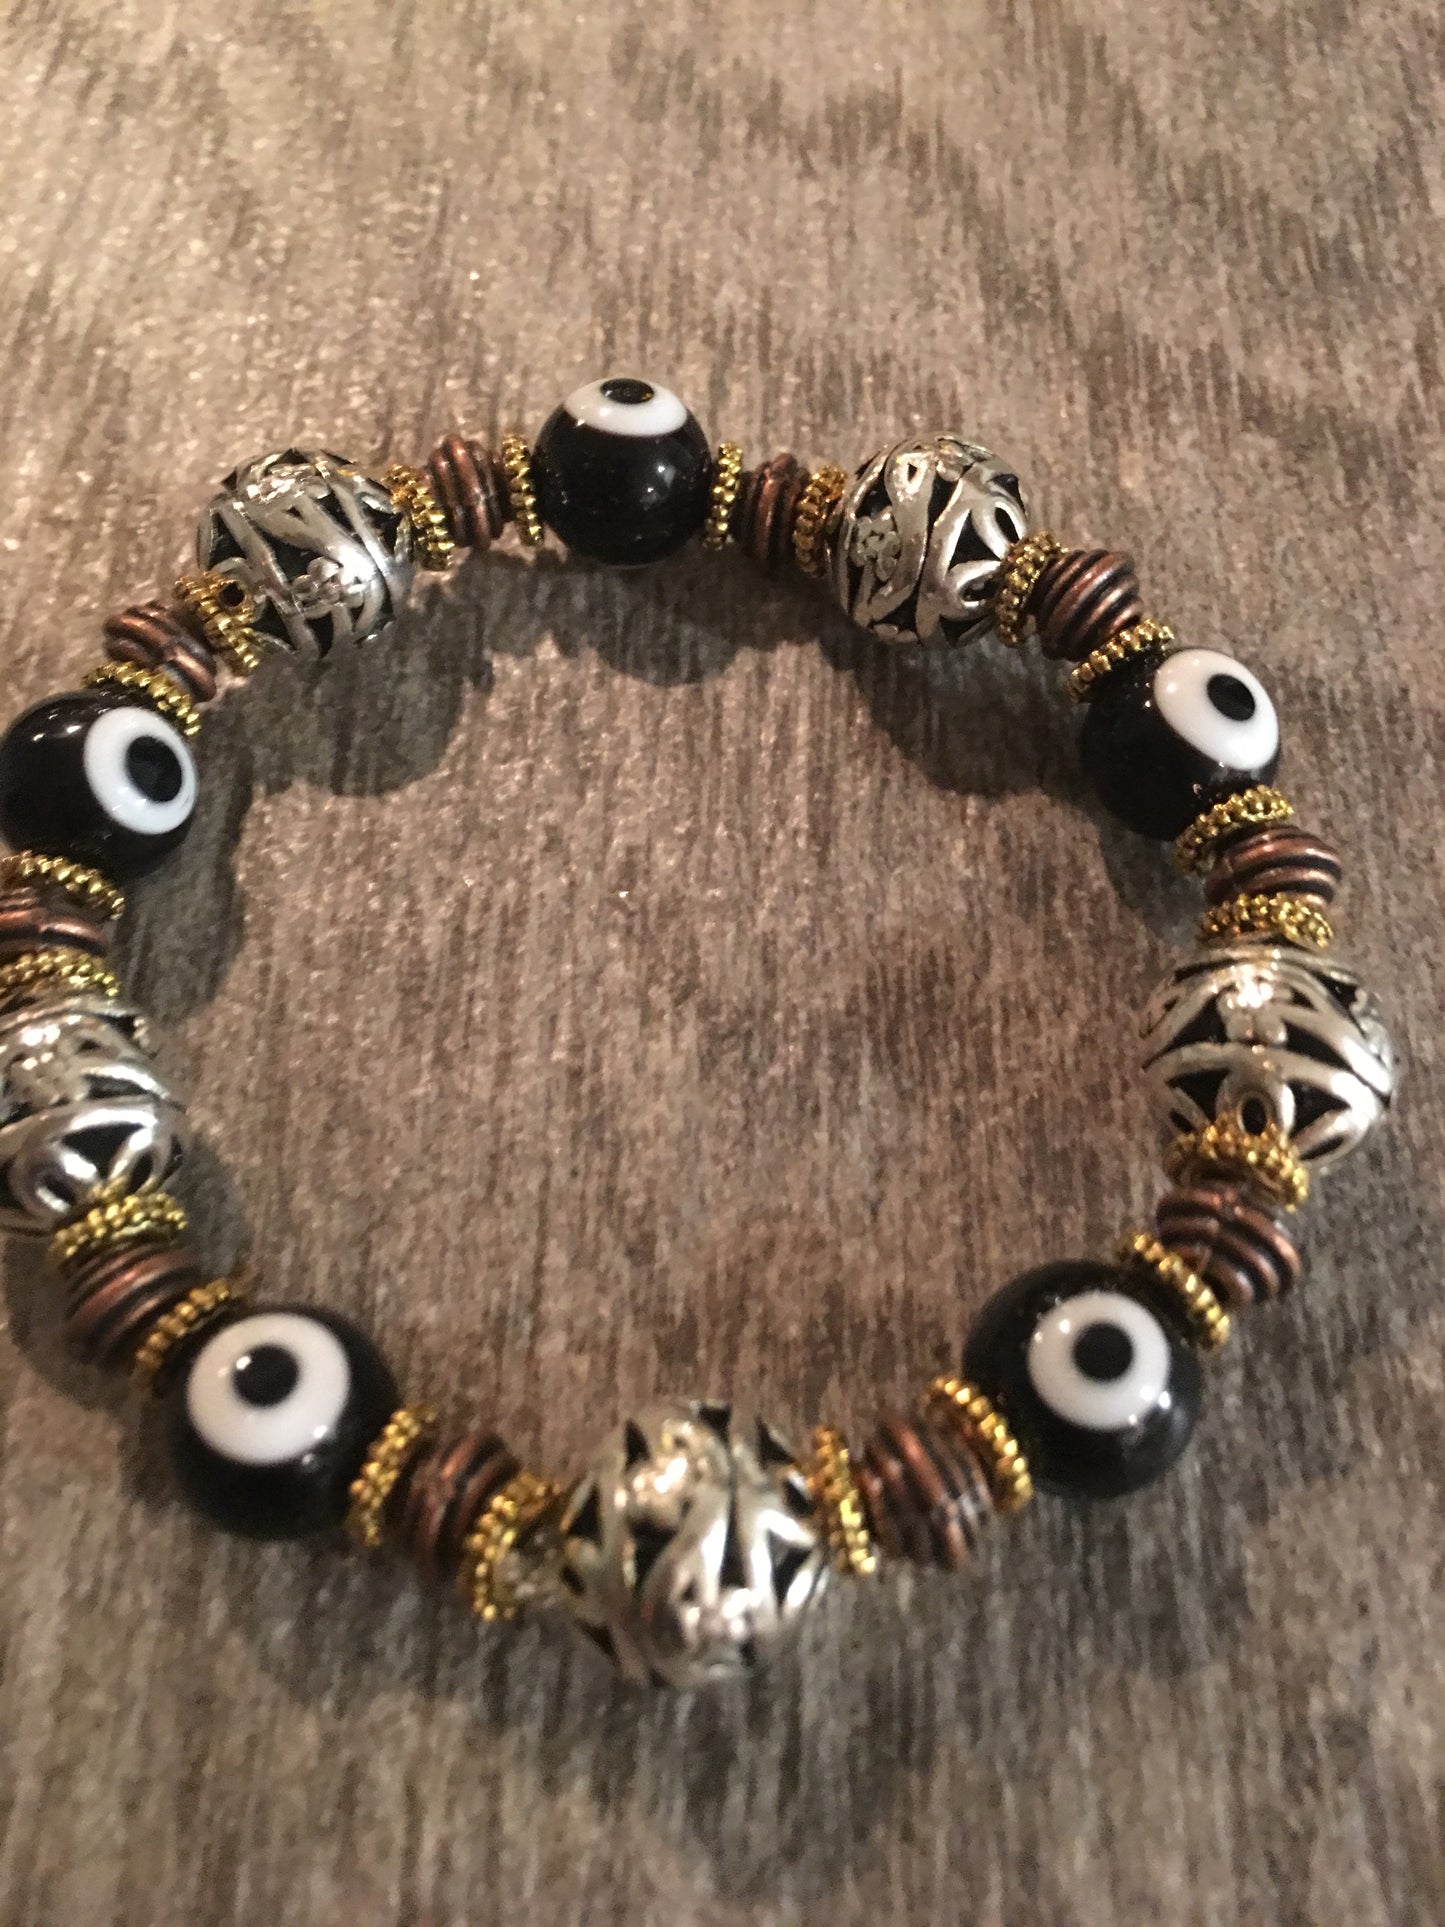 Two tone - Black and Gold Bracelet